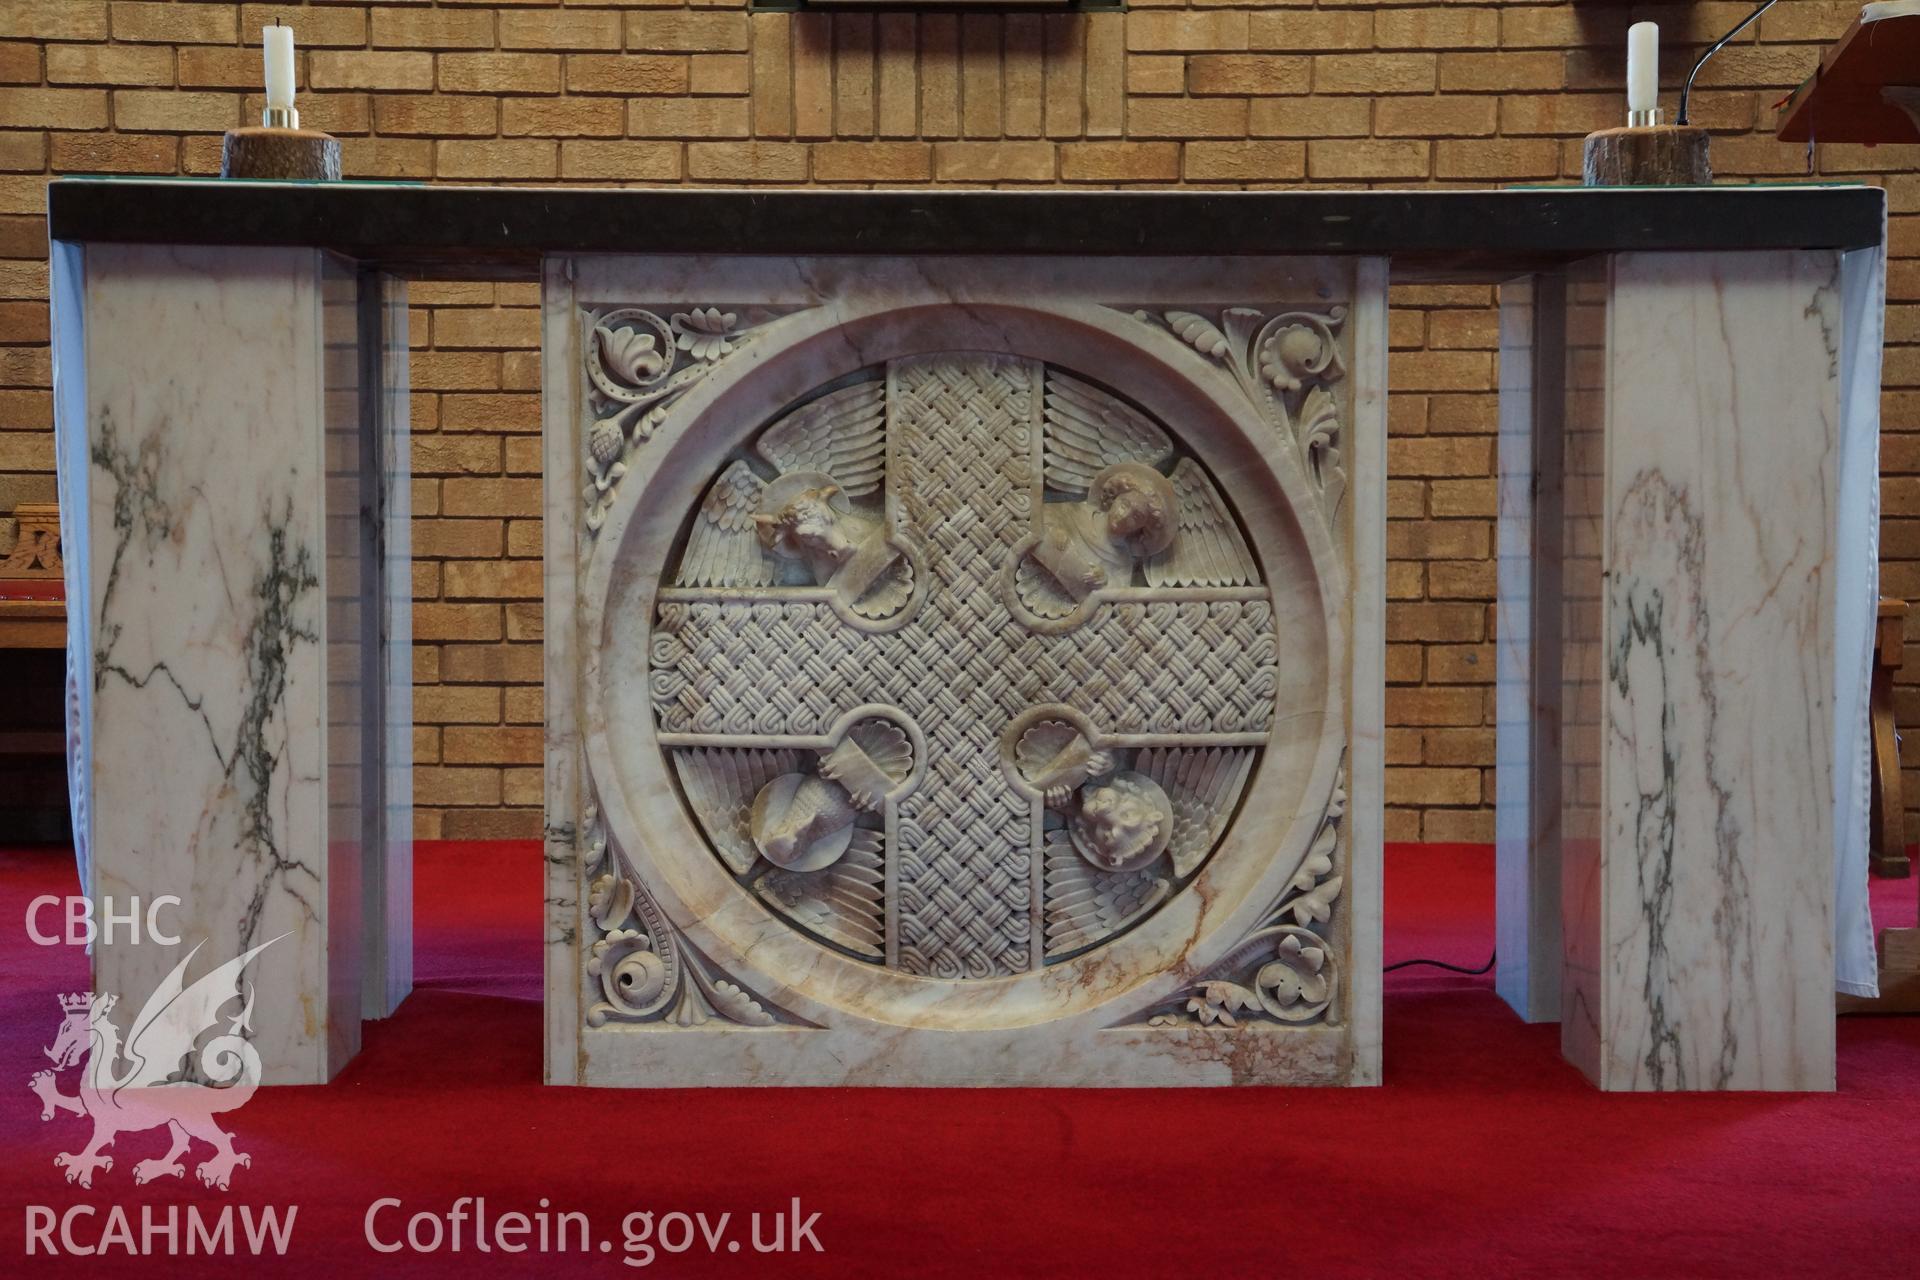 Digital colour photograph showing the marble altar by Pollen in Our Lady of the Assumption Catholic church, Rhyl.